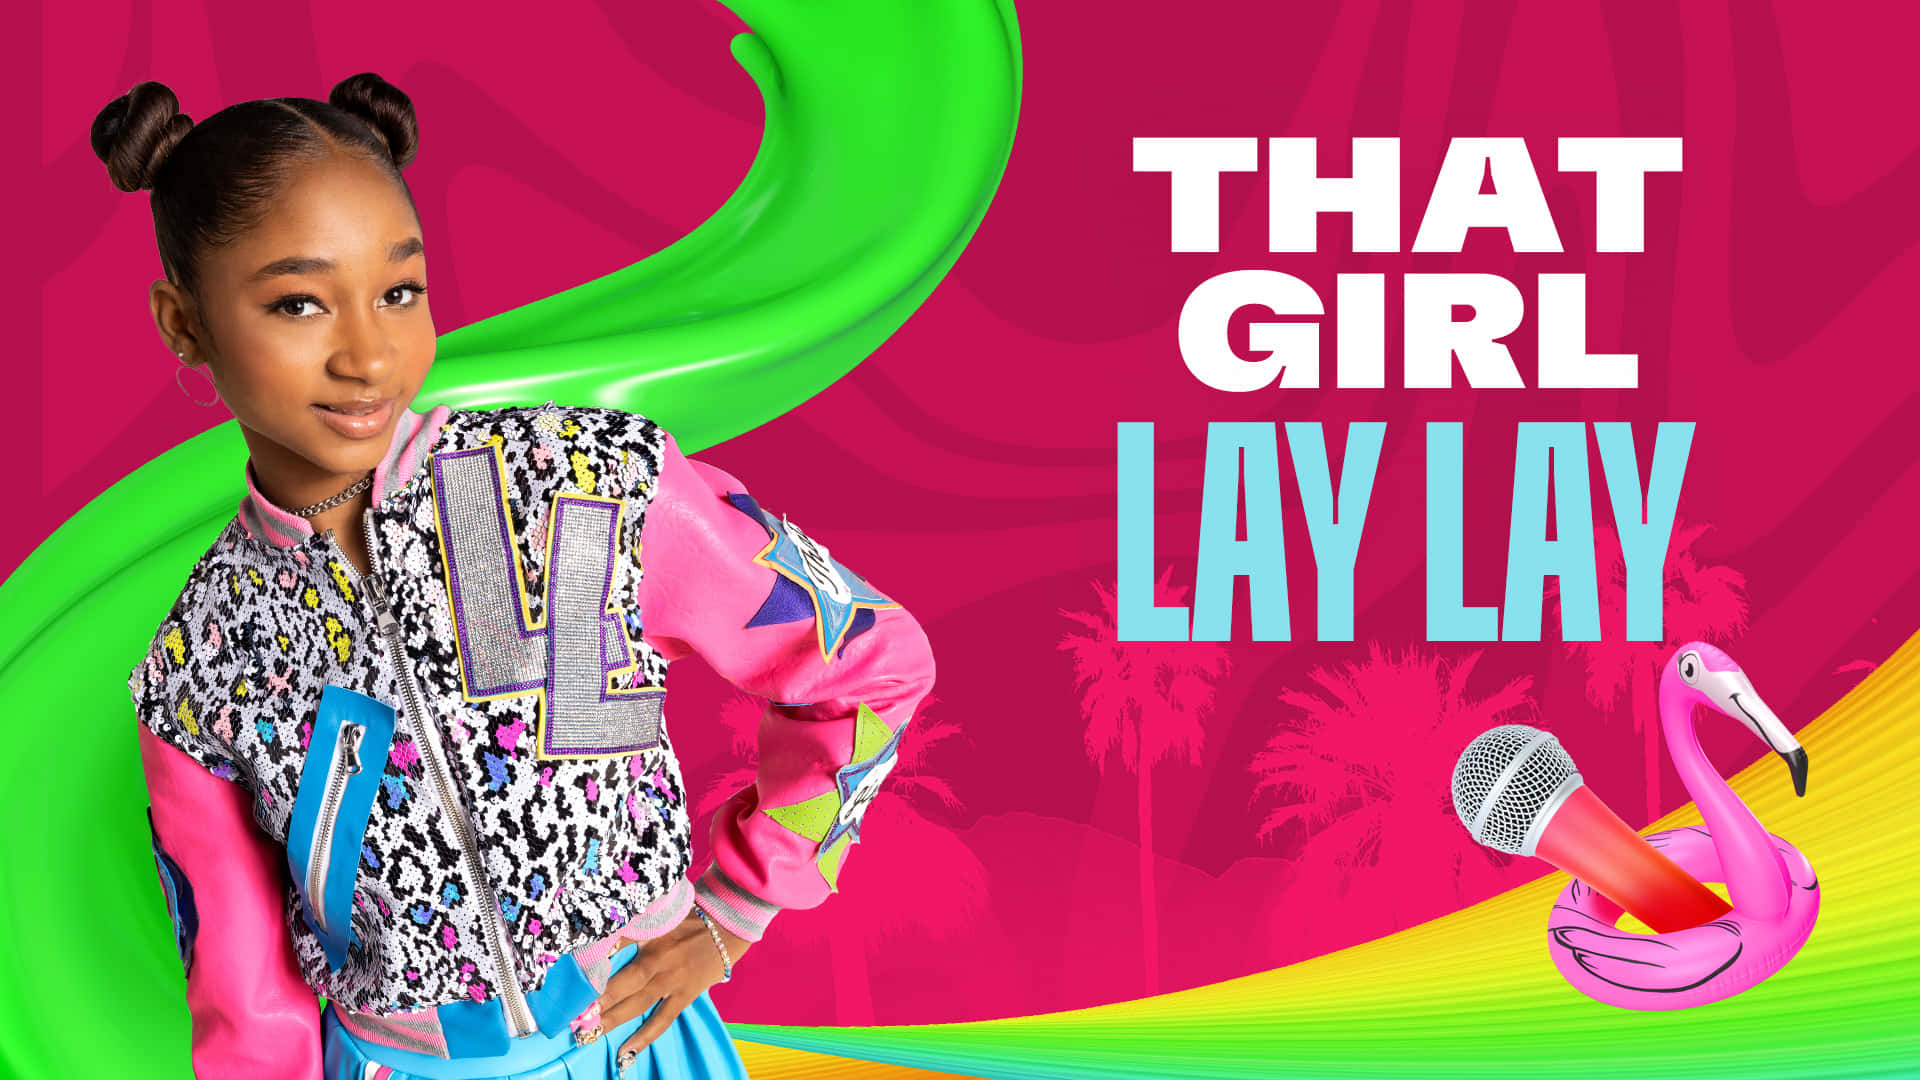 Download That Girl Lay Lay  an up and coming young rapper Wallpaper   Wallpaperscom